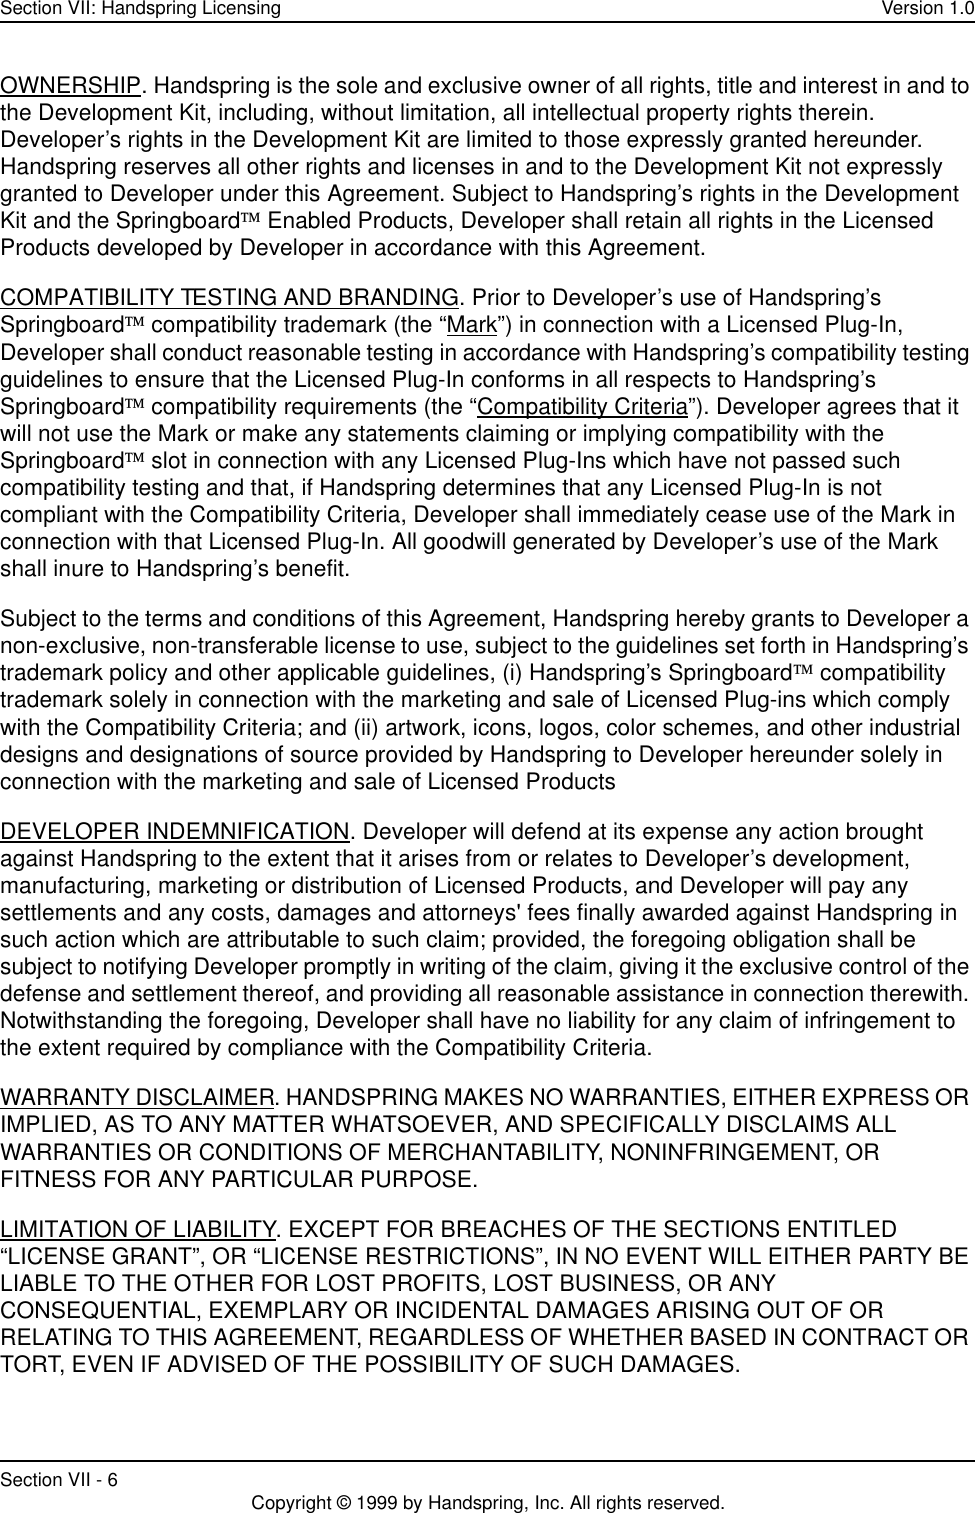 Section VII: Handspring Licensing Version 1.0Section VII - 6 Copyright © 1999 by Handspring, Inc. All rights reserved.OWNERSHIP. Handspring is the sole and exclusive owner of all rights, title and interest in and to the Development Kit, including, without limitation, all intellectual property rights therein. Developer’s rights in the Development Kit are limited to those expressly granted hereunder. Handspring reserves all other rights and licenses in and to the Development Kit not expressly granted to Developer under this Agreement. Subject to Handspring’s rights in the Development Kit and the Springboard Enabled Products, Developer shall retain all rights in the Licensed Products developed by Developer in accordance with this Agreement.COMPATIBILITY TESTING AND BRANDING. Prior to Developer’s use of Handspring’s Springboard compatibility trademark (the “Mark”) in connection with a Licensed Plug-In, Developer shall conduct reasonable testing in accordance with Handspring’s compatibility testing guidelines to ensure that the Licensed Plug-In conforms in all respects to Handspring’s Springboard compatibility requirements (the “Compatibility Criteria”). Developer agrees that it will not use the Mark or make any statements claiming or implying compatibility with the Springboard slot in connection with any Licensed Plug-Ins which have not passed such compatibility testing and that, if Handspring determines that any Licensed Plug-In is not compliant with the Compatibility Criteria, Developer shall immediately cease use of the Mark in connection with that Licensed Plug-In. All goodwill generated by Developer’s use of the Mark shall inure to Handspring’s benefit.Subject to the terms and conditions of this Agreement, Handspring hereby grants to Developer a non-exclusive, non-transferable license to use, subject to the guidelines set forth in Handspring’s trademark policy and other applicable guidelines, (i) Handspring’s Springboard compatibility trademark solely in connection with the marketing and sale of Licensed Plug-ins which comply with the Compatibility Criteria; and (ii) artwork, icons, logos, color schemes, and other industrial designs and designations of source provided by Handspring to Developer hereunder solely in connection with the marketing and sale of Licensed ProductsDEVELOPER INDEMNIFICATION. Developer will defend at its expense any action brought against Handspring to the extent that it arises from or relates to Developer’s development, manufacturing, marketing or distribution of Licensed Products, and Developer will pay any settlements and any costs, damages and attorneys&apos; fees finally awarded against Handspring in such action which are attributable to such claim; provided, the foregoing obligation shall be subject to notifying Developer promptly in writing of the claim, giving it the exclusive control of the defense and settlement thereof, and providing all reasonable assistance in connection therewith. Notwithstanding the foregoing, Developer shall have no liability for any claim of infringement to the extent required by compliance with the Compatibility Criteria.WARRANTY DISCLAIMER. HANDSPRING MAKES NO WARRANTIES, EITHER EXPRESS OR IMPLIED, AS TO ANY MATTER WHATSOEVER, AND SPECIFICALLY DISCLAIMS ALL WARRANTIES OR CONDITIONS OF MERCHANTABILITY, NONINFRINGEMENT, OR FITNESS FOR ANY PARTICULAR PURPOSE.LIMITATION OF LIABILITY. EXCEPT FOR BREACHES OF THE SECTIONS ENTITLED “LICENSE GRANT”, OR “LICENSE RESTRICTIONS”, IN NO EVENT WILL EITHER PARTY BE LIABLE TO THE OTHER FOR LOST PROFITS, LOST BUSINESS, OR ANY CONSEQUENTIAL, EXEMPLARY OR INCIDENTAL DAMAGES ARISING OUT OF OR RELATING TO THIS AGREEMENT, REGARDLESS OF WHETHER BASED IN CONTRACT OR TORT, EVEN IF ADVISED OF THE POSSIBILITY OF SUCH DAMAGES.